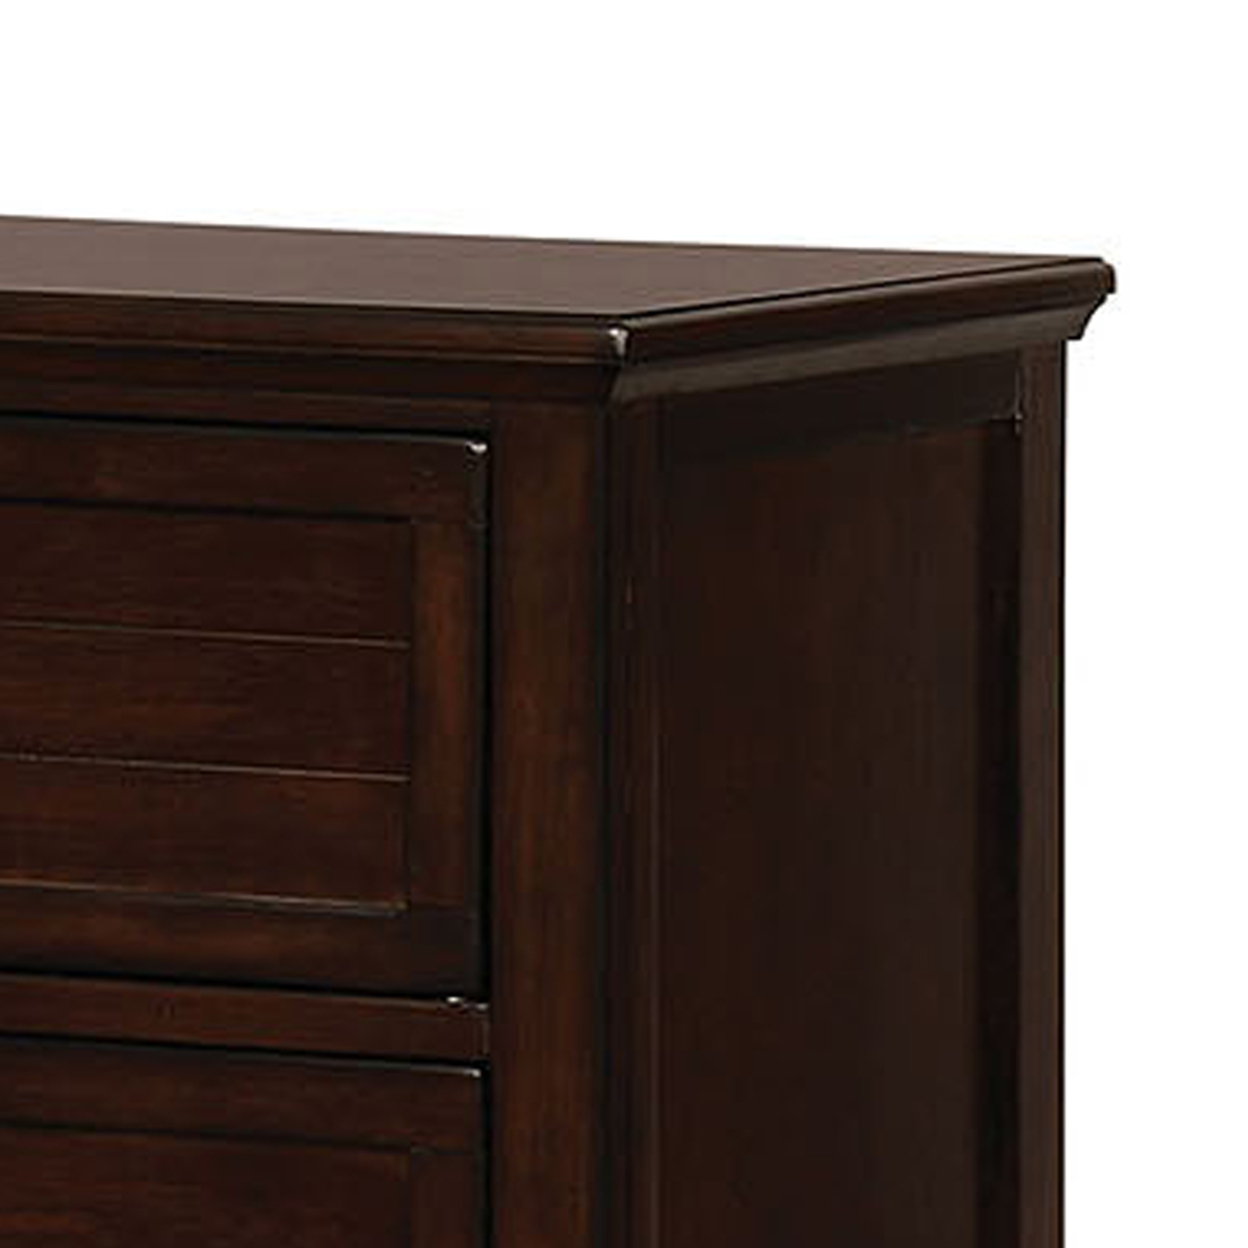 Wooden Chest With 4 Drawers And Chamfered Legs, Cherry Brown- Saltoro Sherpi